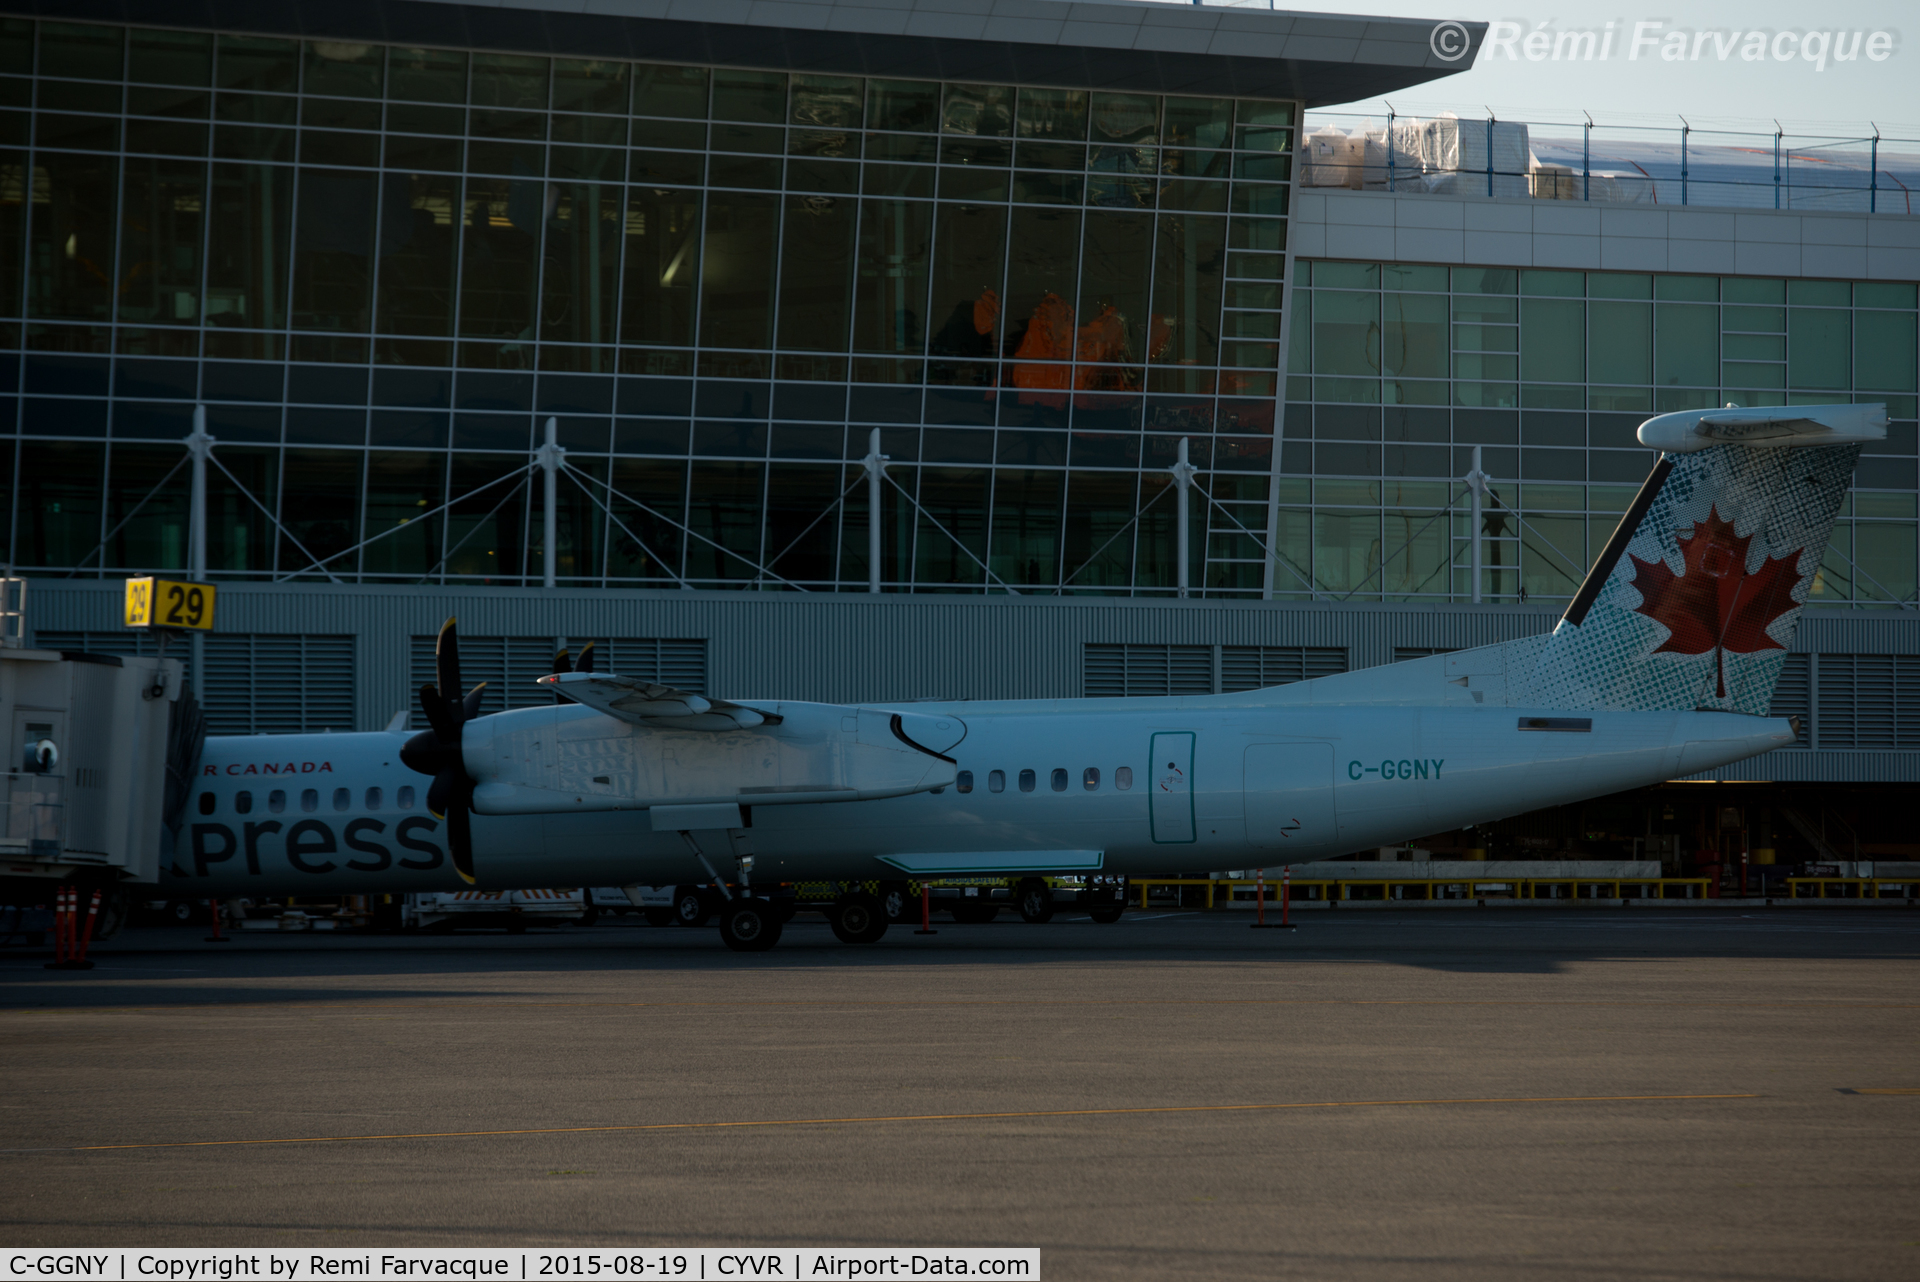 C-GGNY, 2011 Bombardier DHC-8-402 Dash 8 C/N 4386, Parked at domestic terminal.